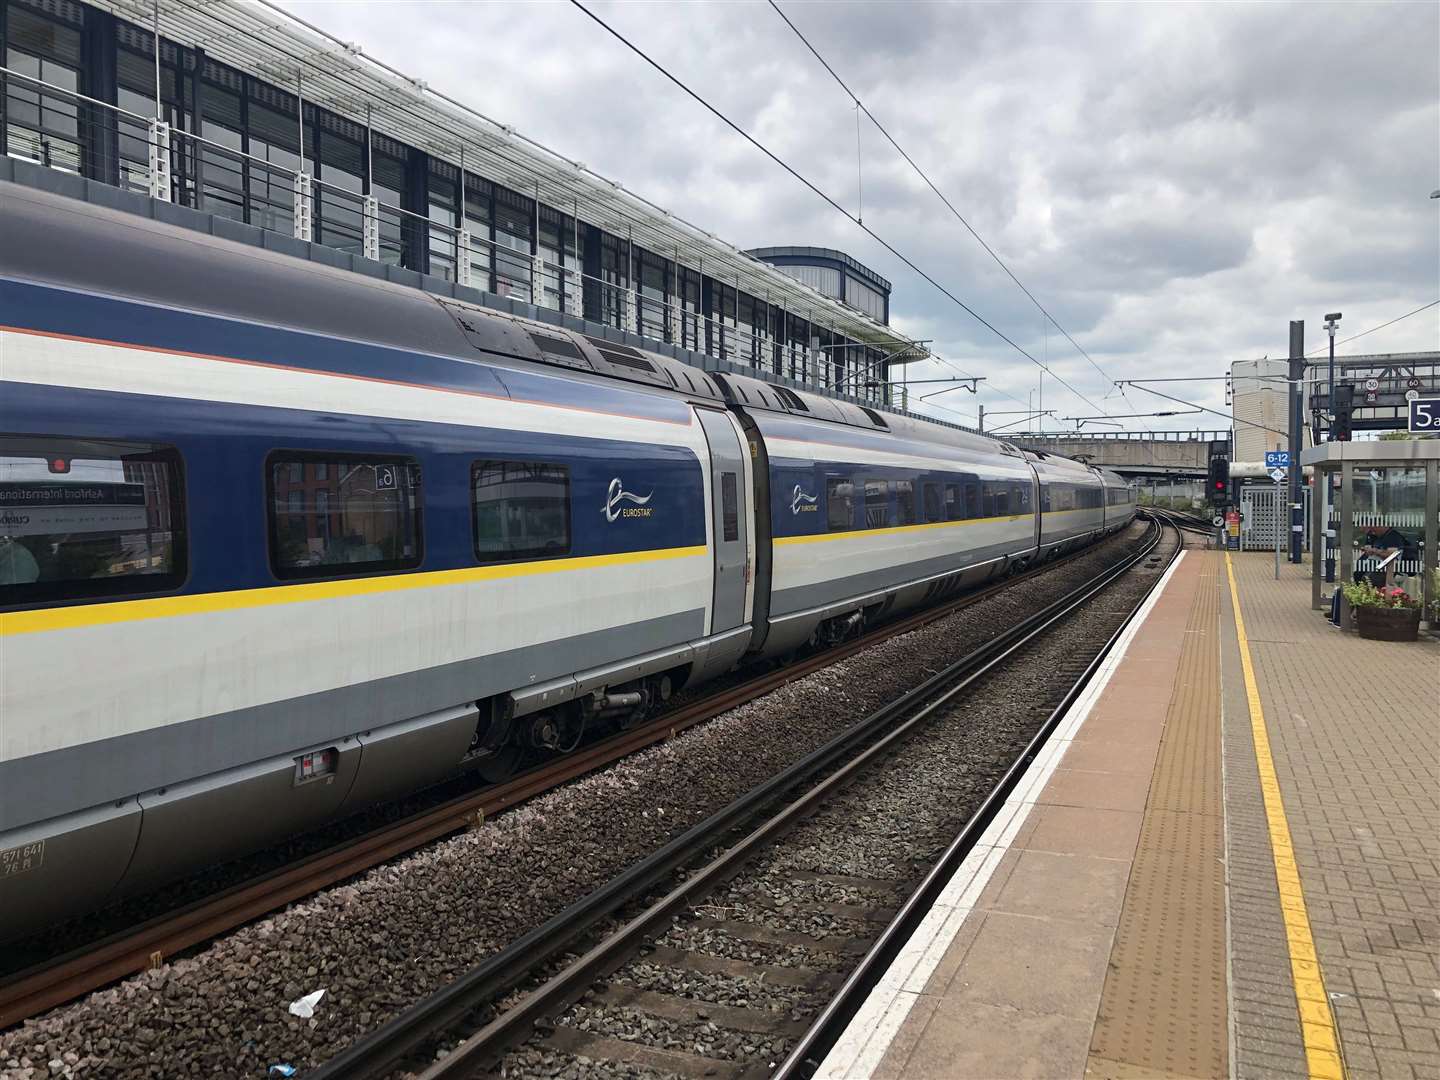 Eurostar services have not called in at either Ashford or Ebbsfleet international stations since travel restrictions were introduced